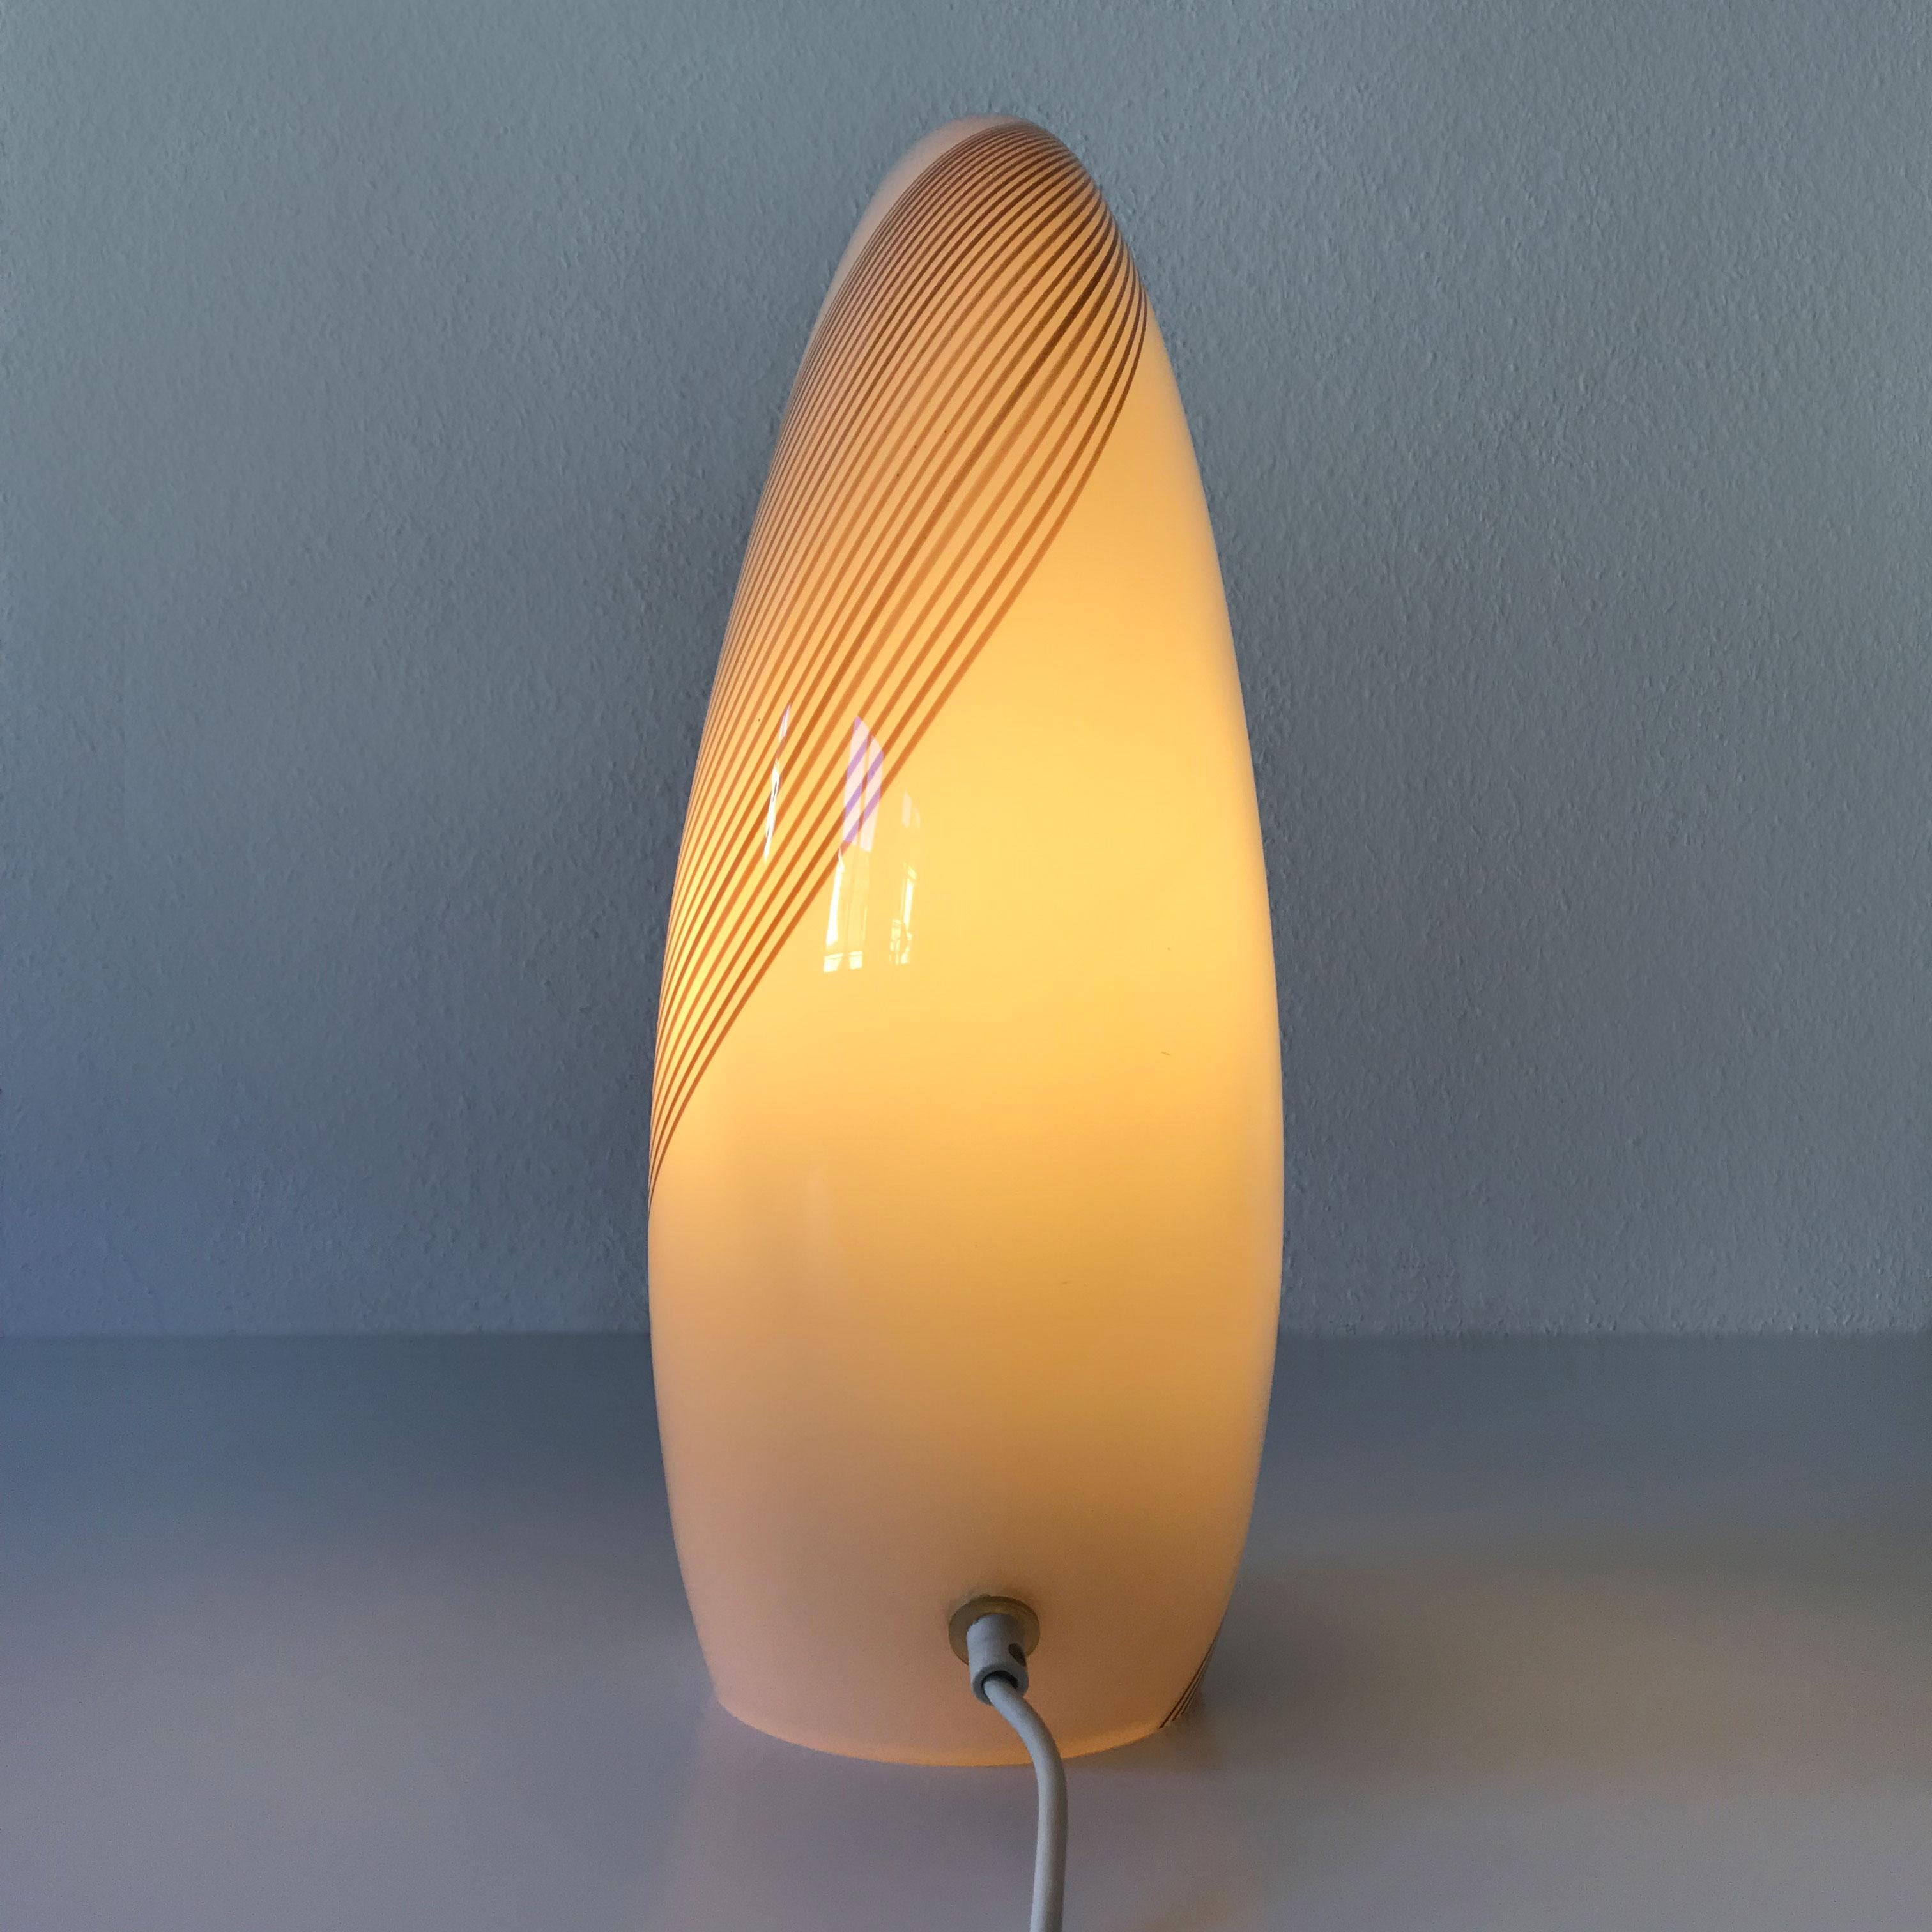 Late 20th Century Exceptional Murano Glass Table Lamp by Lino Tagliapietra for Effetre 1980s Italy For Sale